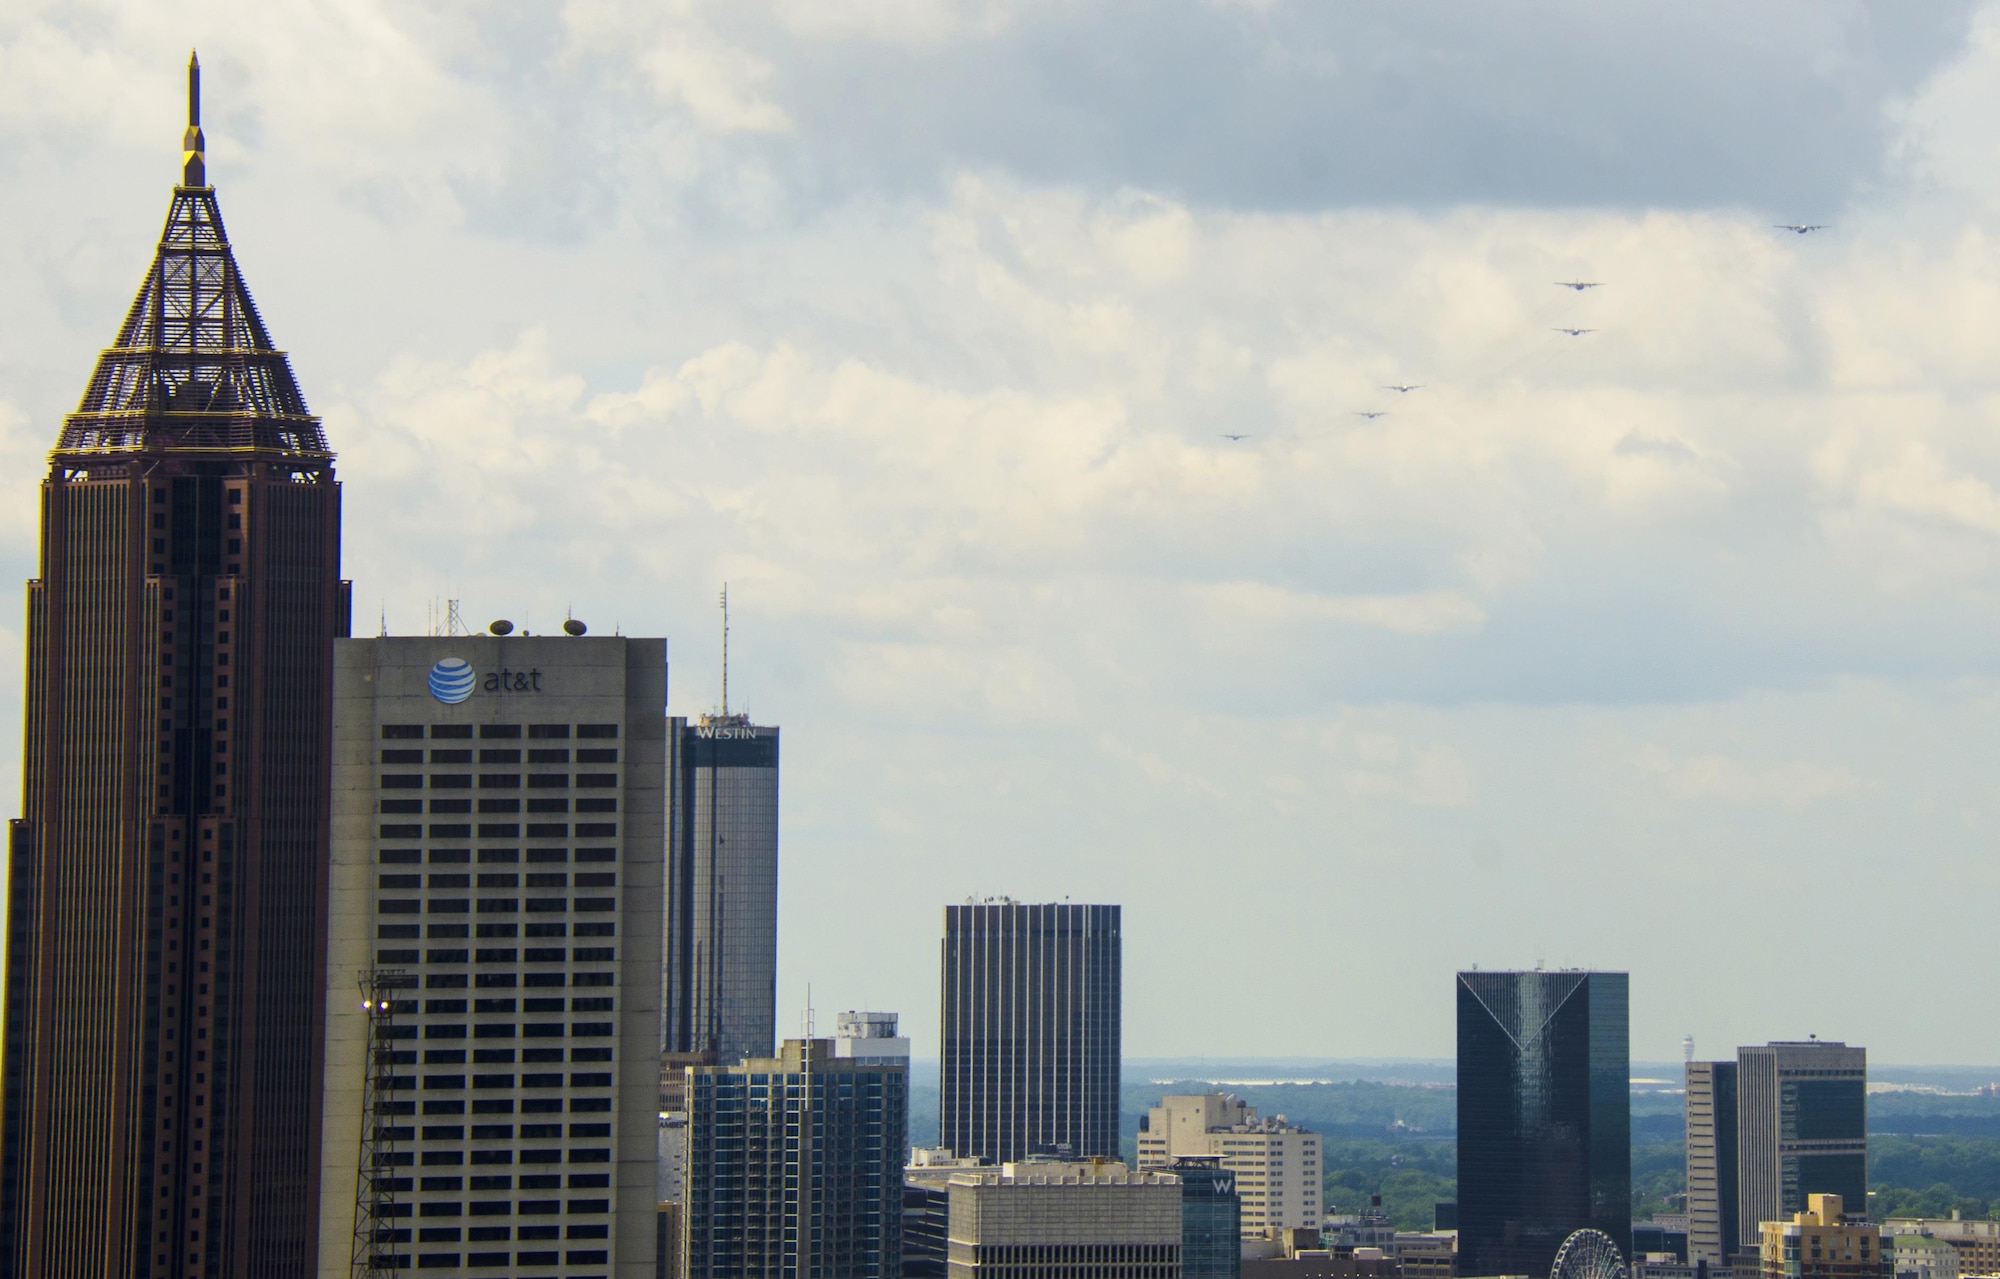 A six-ship C-130 Hercules formation from Dobbins Air Reserve Base, Ga., flies over downtown Atlanta on July 9, 2016. The 94th Airlift Wing conducted proficiency training missions over downtown Atlanta and much of the metro area. (U.S. Air Force photo/Staff Sgt. Daniel Phelps)
